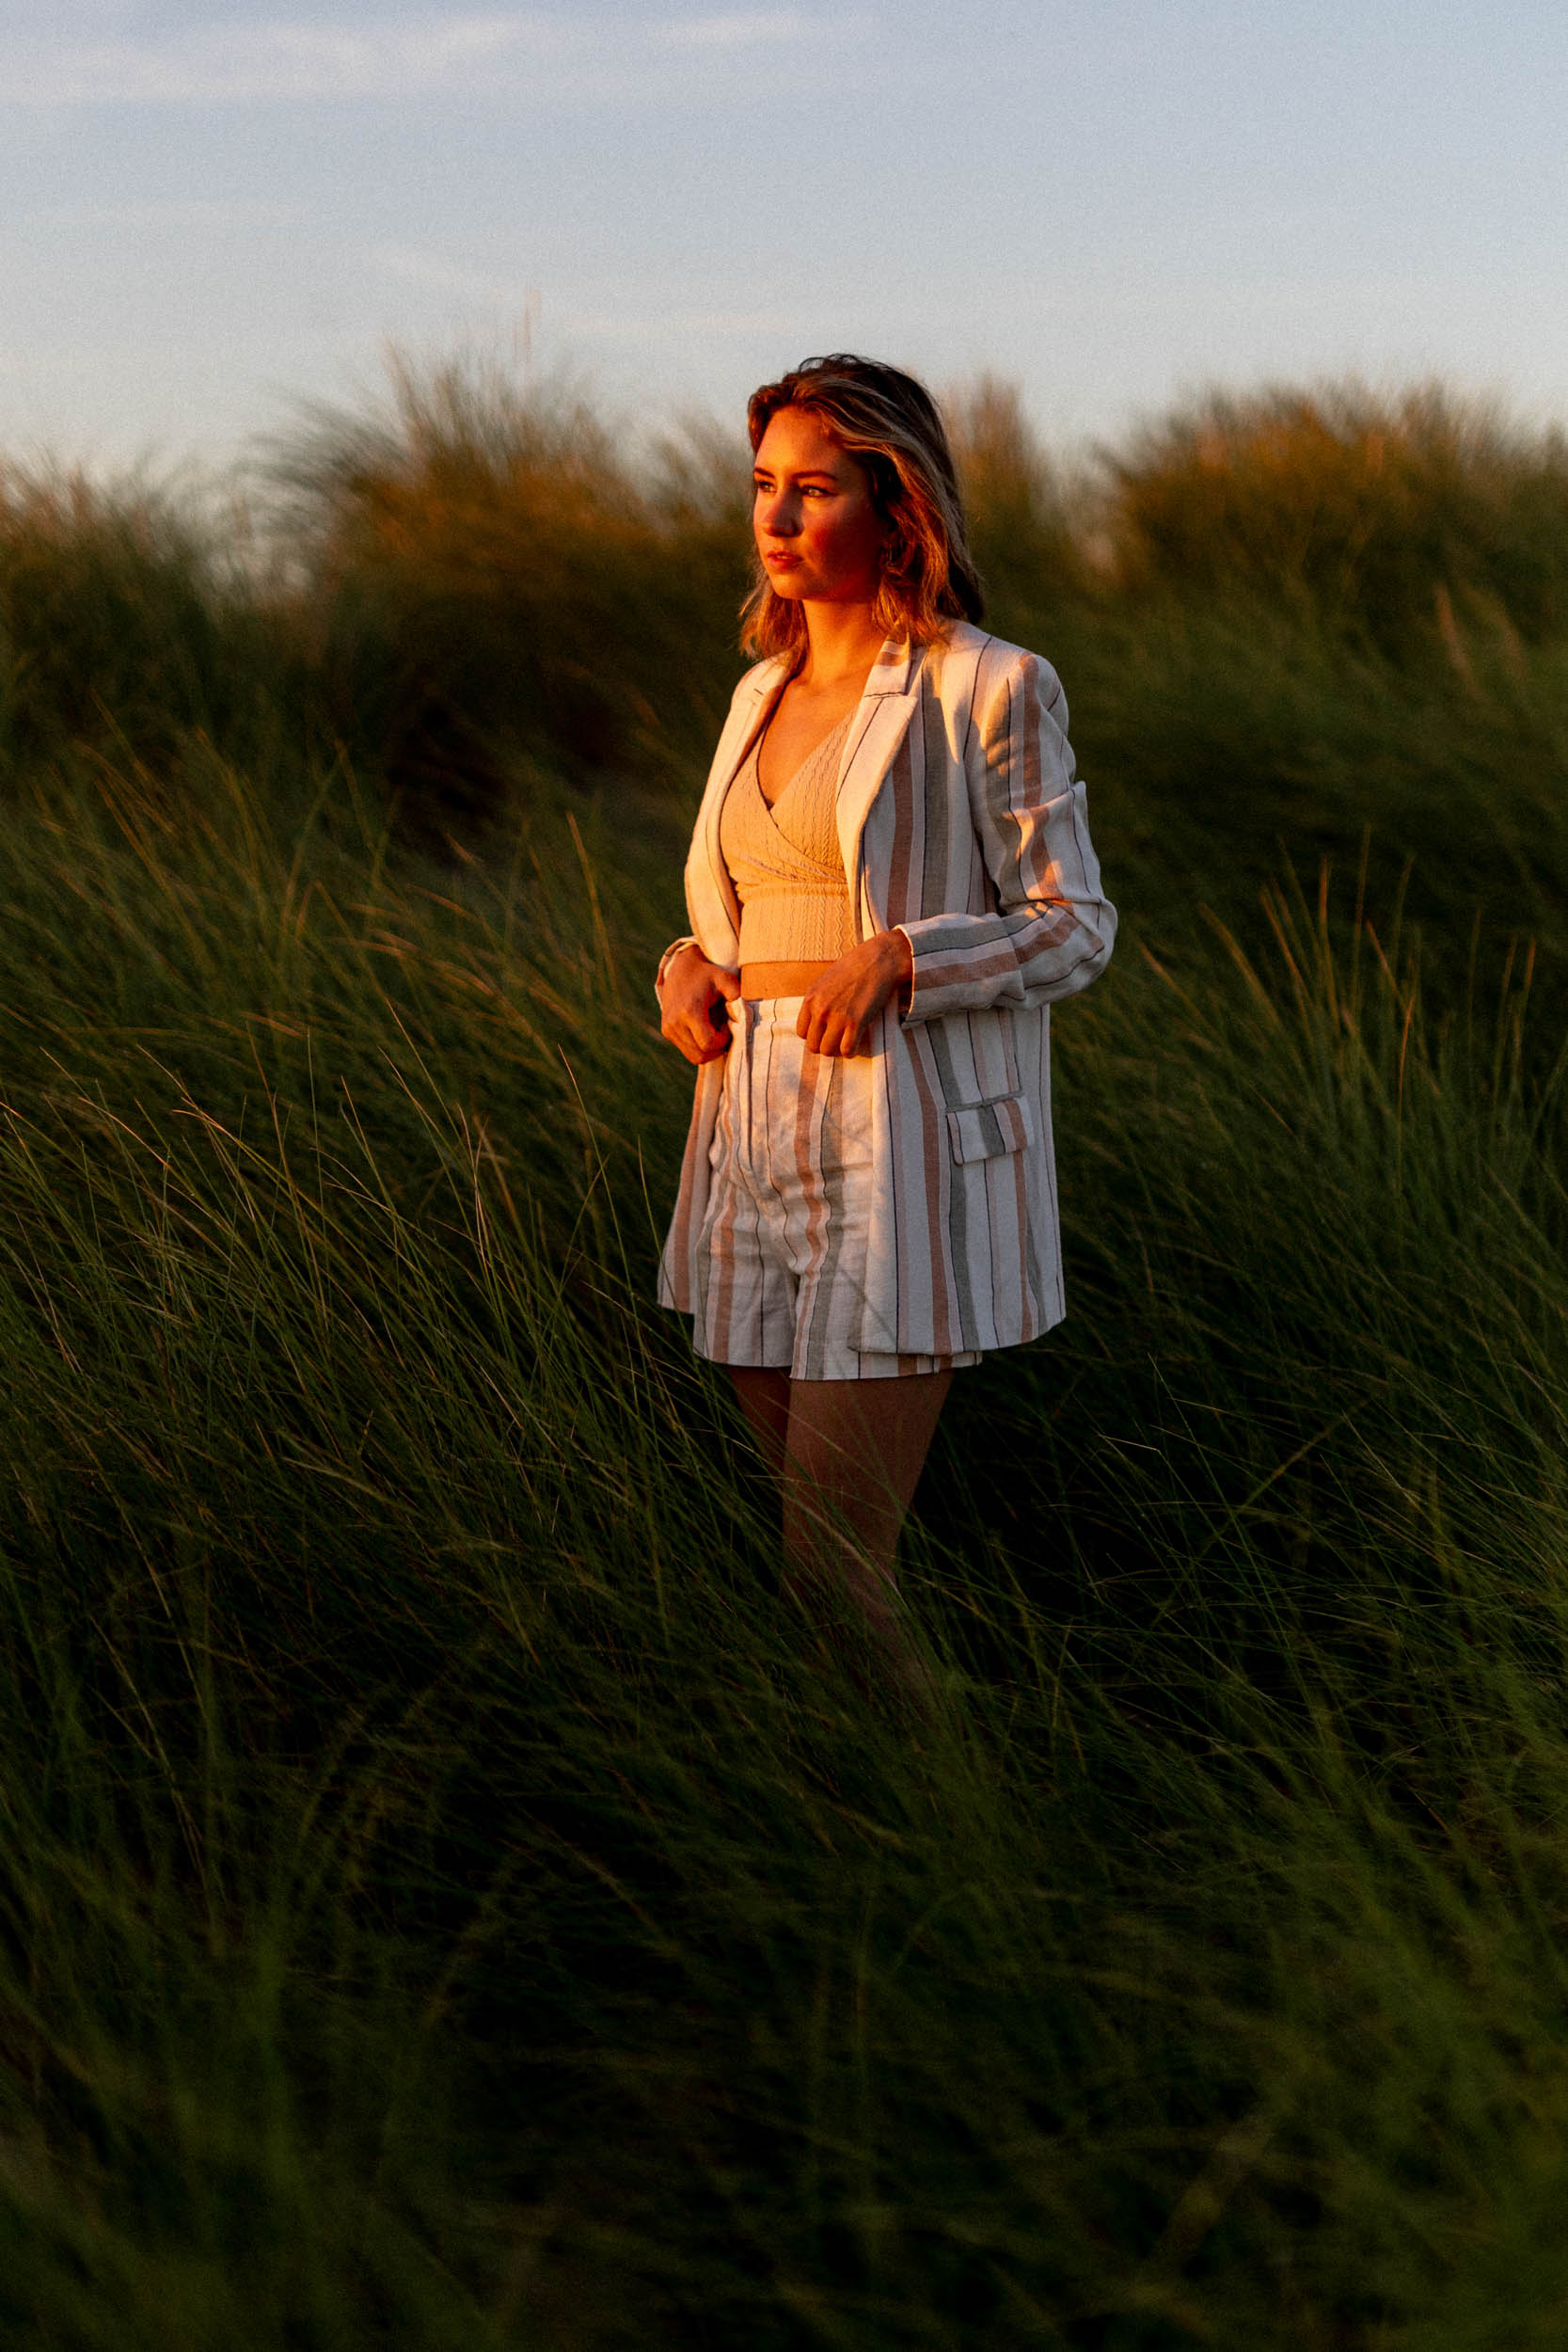 A woman in a blazer and shorts taking beach photos in tall grass.